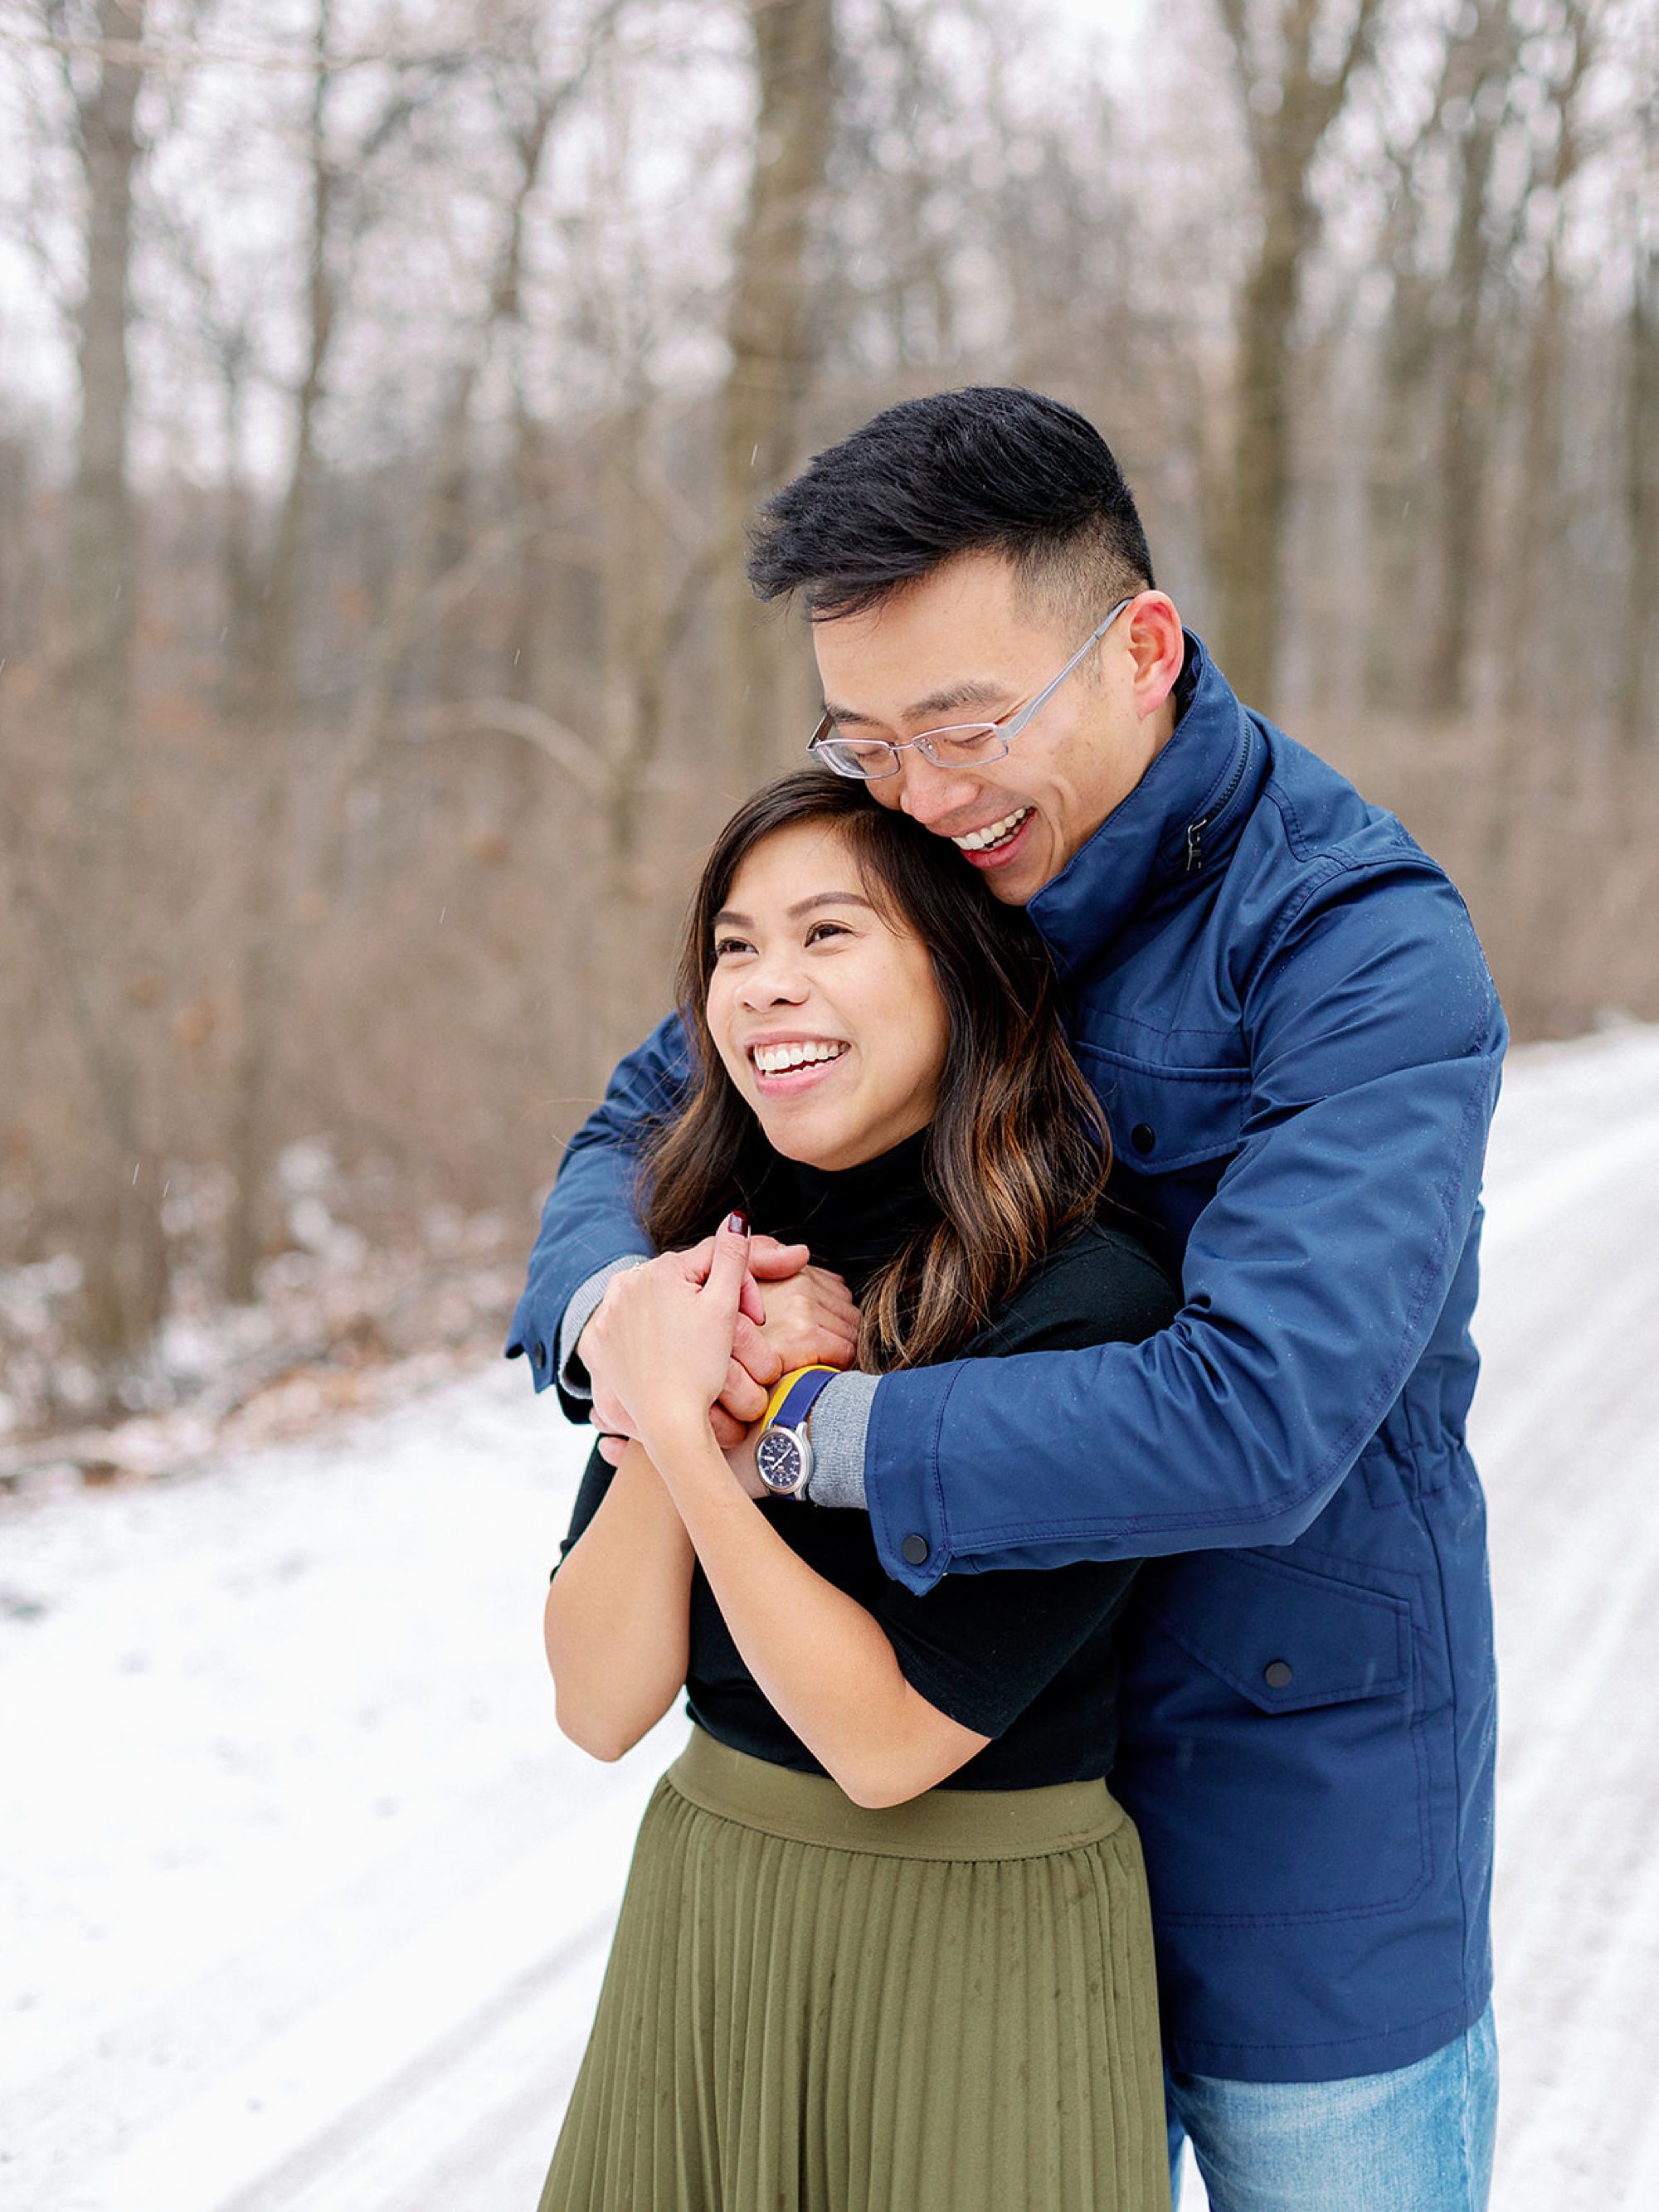 groom hugs bride from behind during Snowy Engagement Session in Bluemont, VA 